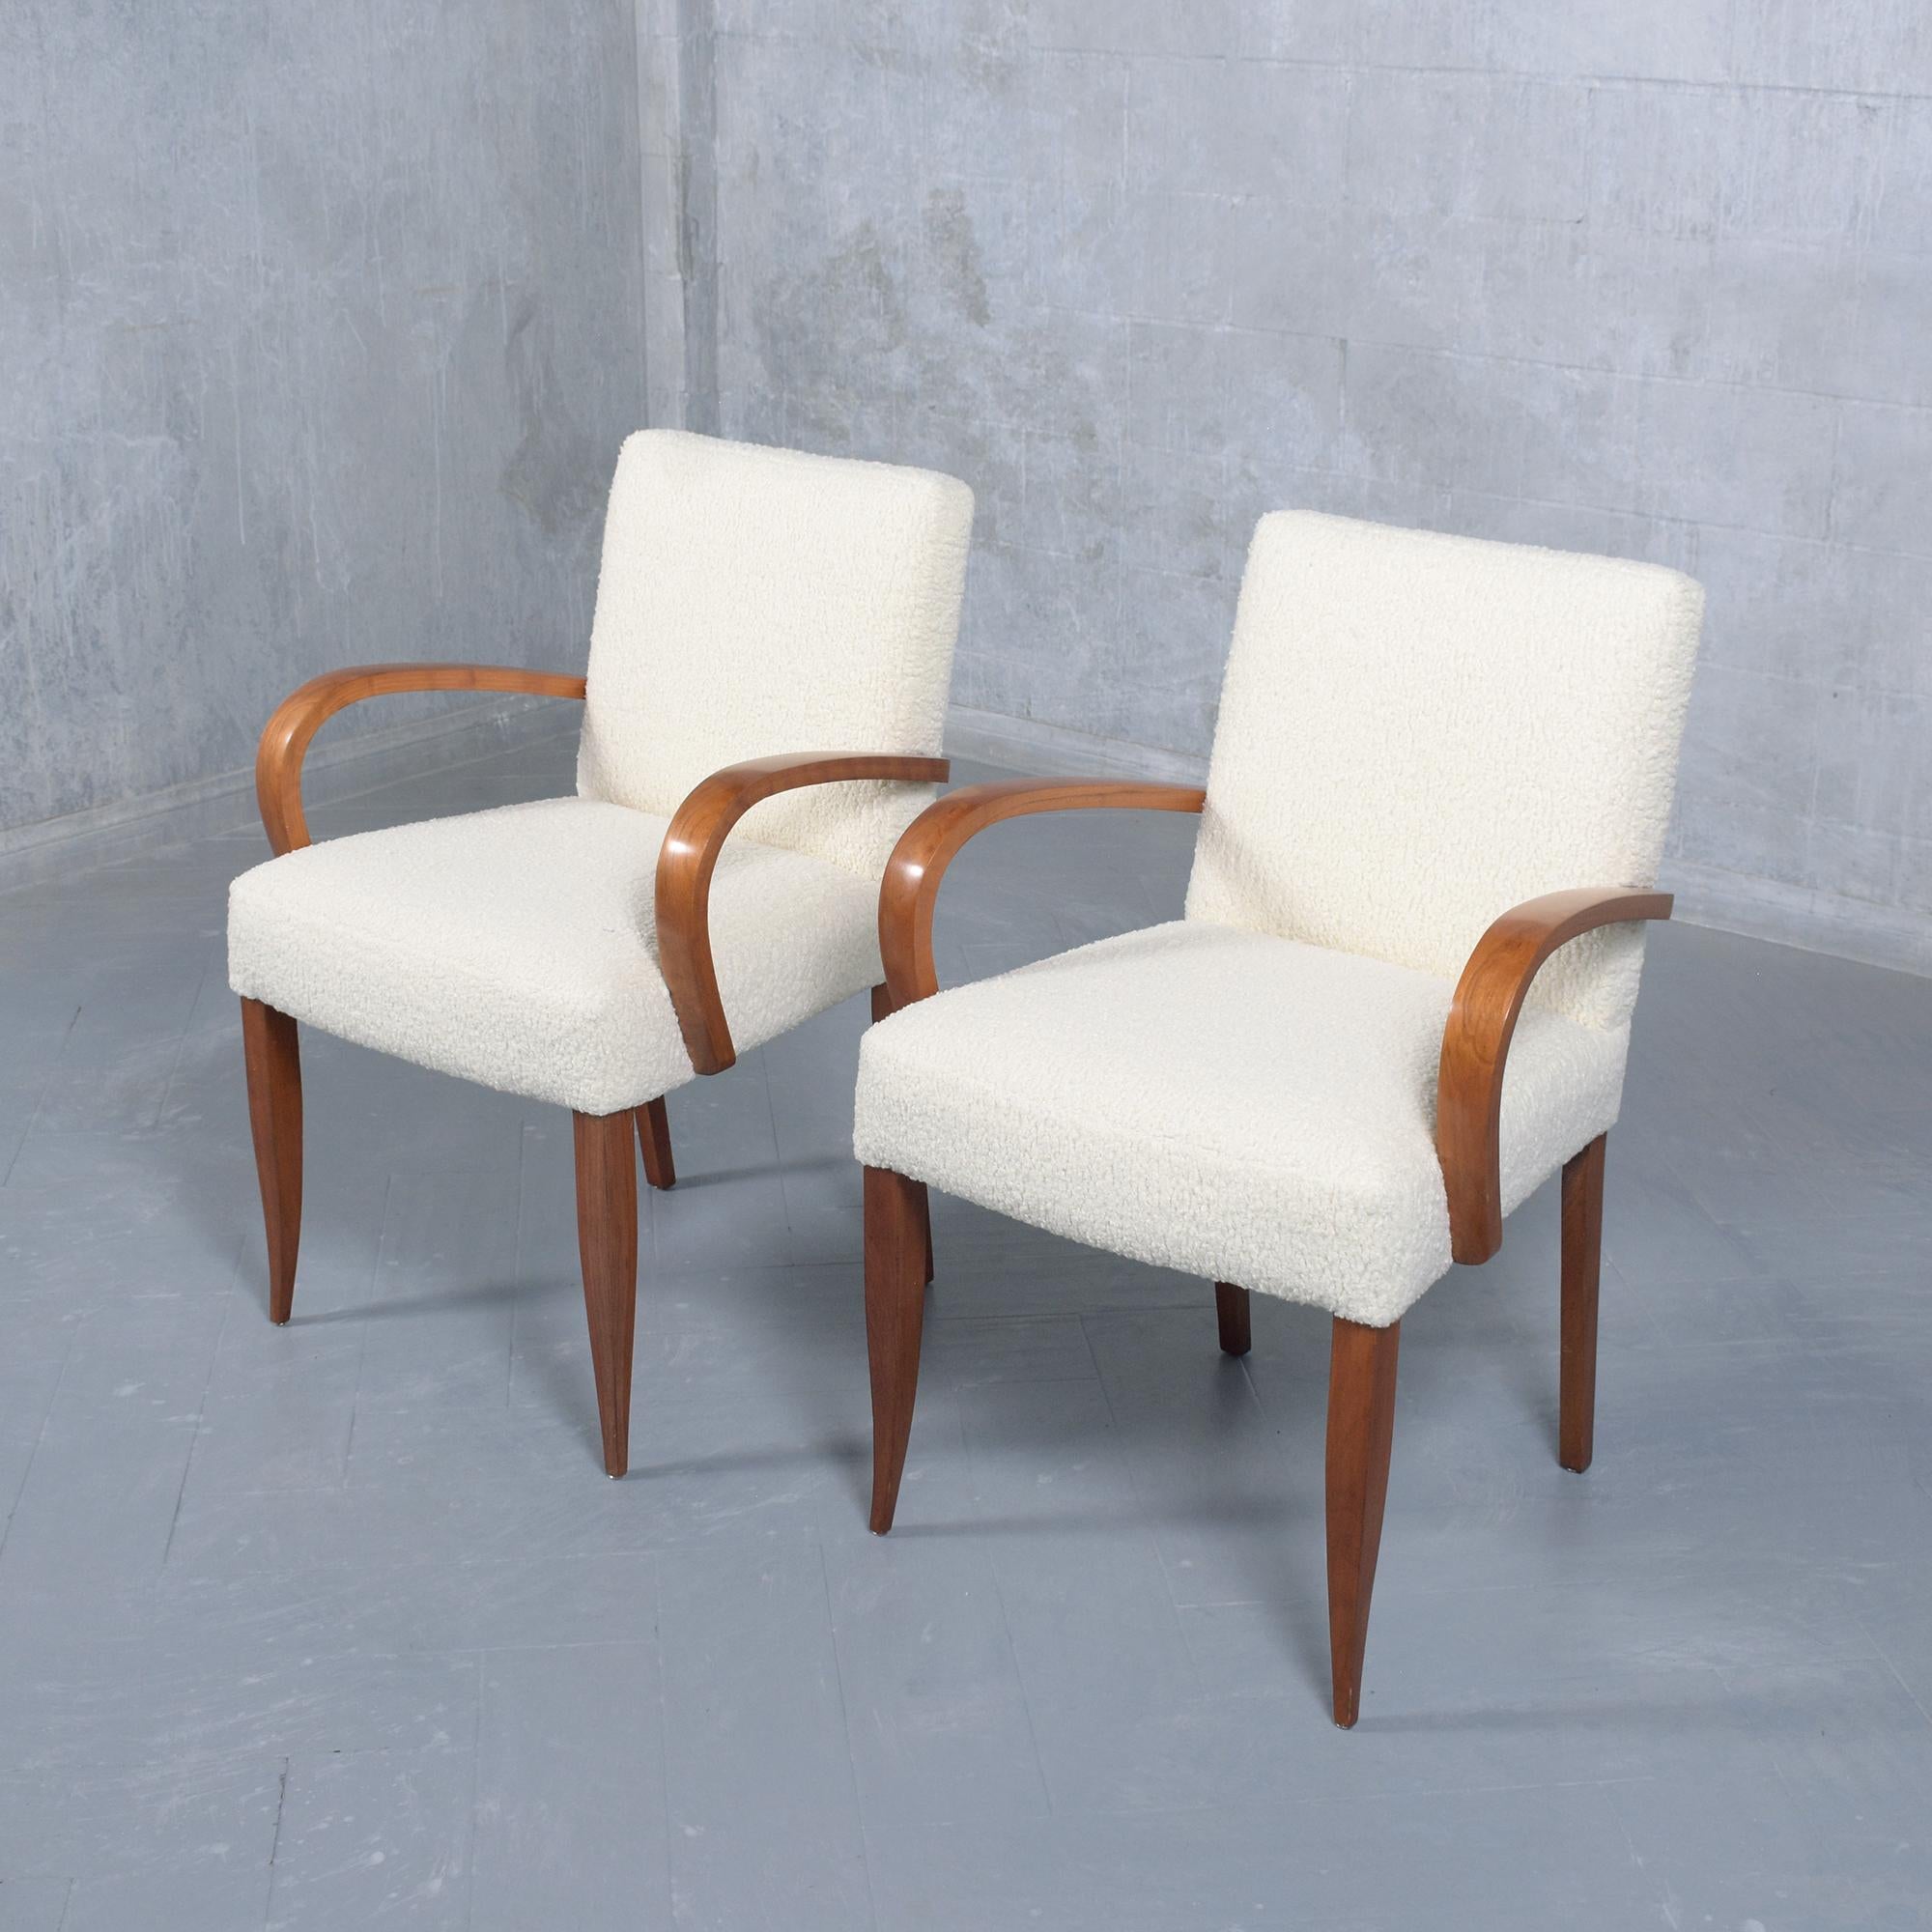 Carved Pair of Mid-Century Modern Walnut Armchairs: Refined Elegance & Comfort For Sale